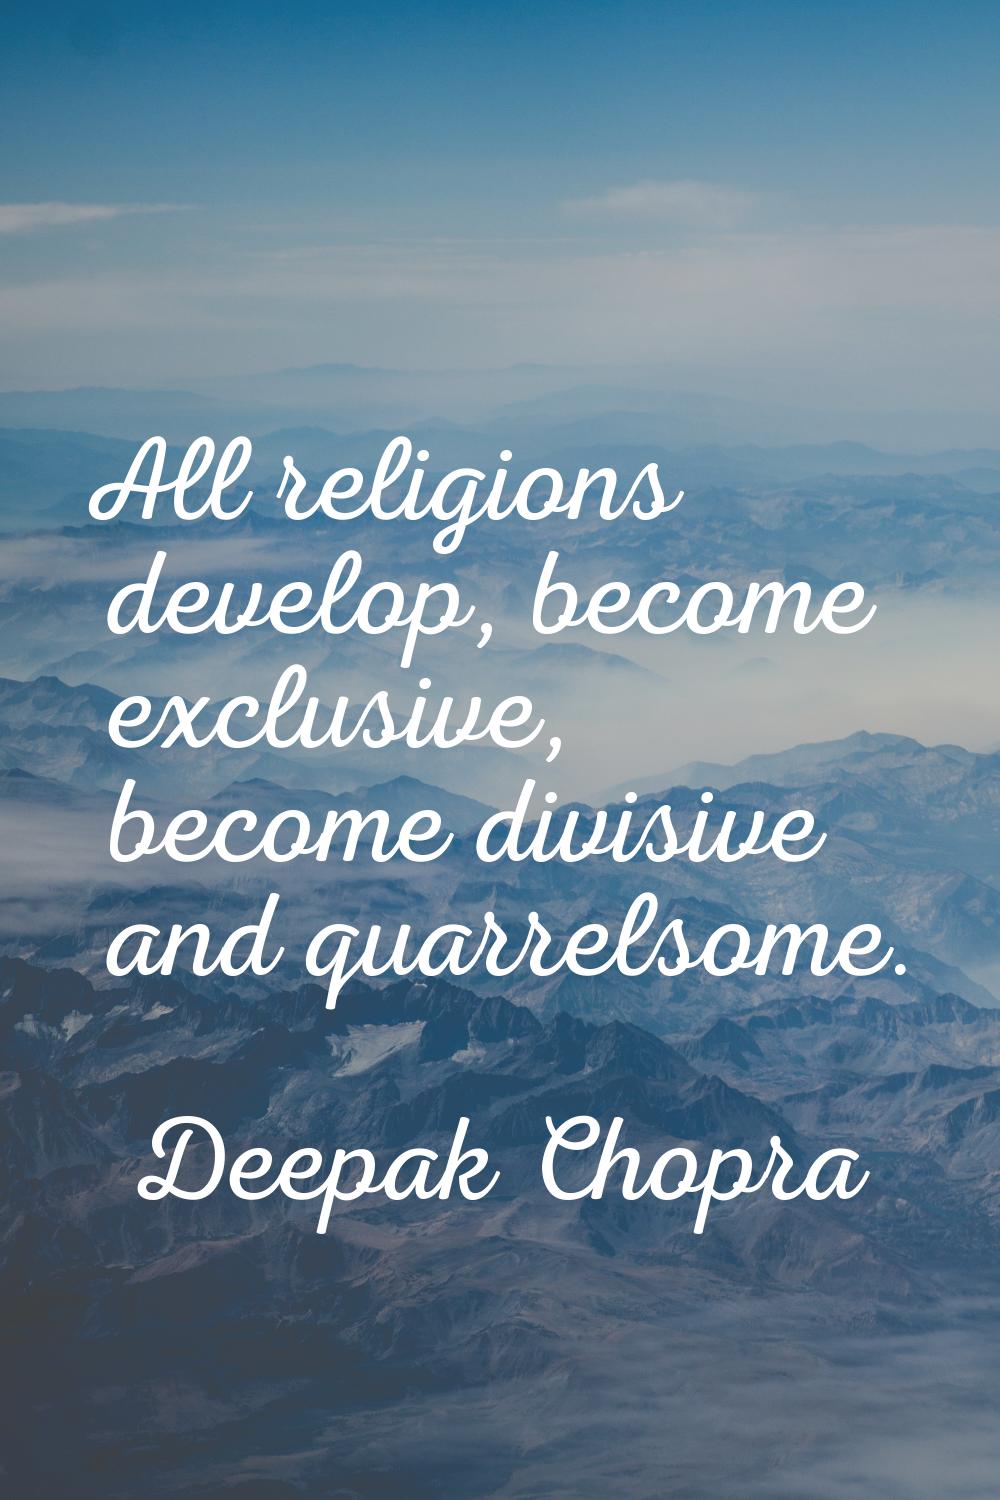 All religions develop, become exclusive, become divisive and quarrelsome.